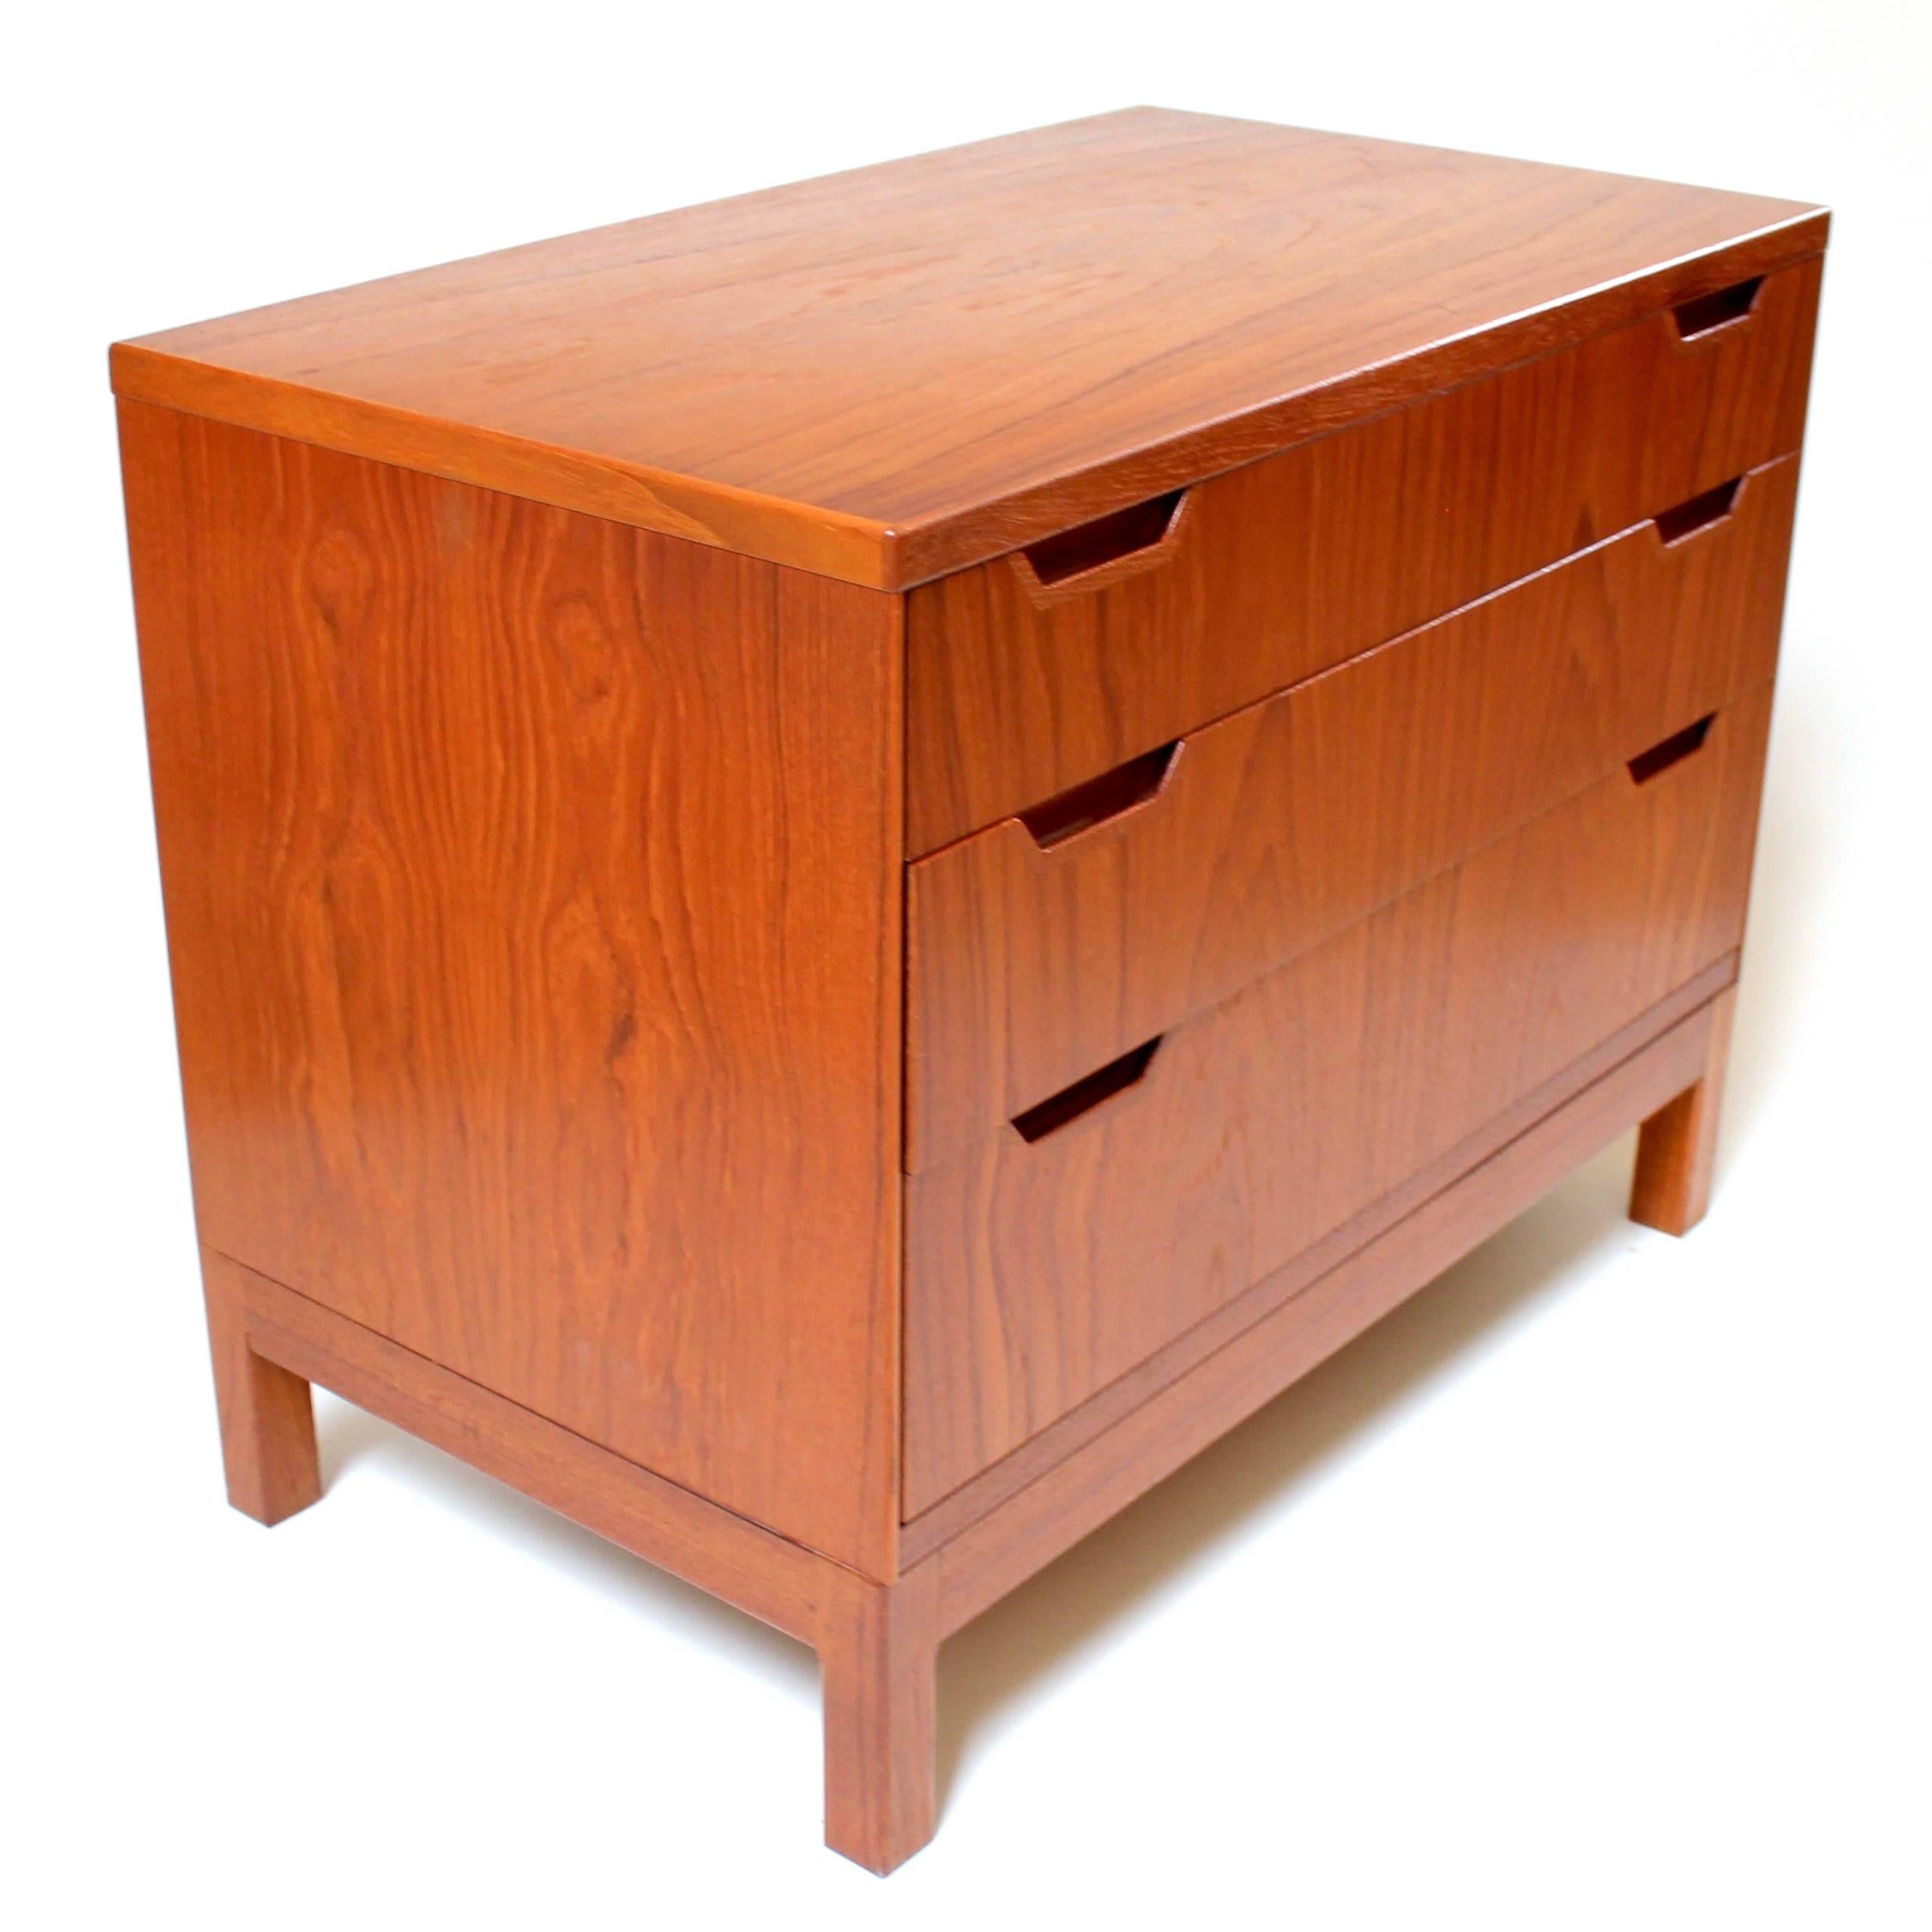 1960s Danish modern teak chest of drawers by Svend Langkilde for Langkilde Mobler. This is a beautifully designed three-drawer small dresser or nightstand with elegant sculptured pulls and matching grain on drawers. Possibly produced for Illums